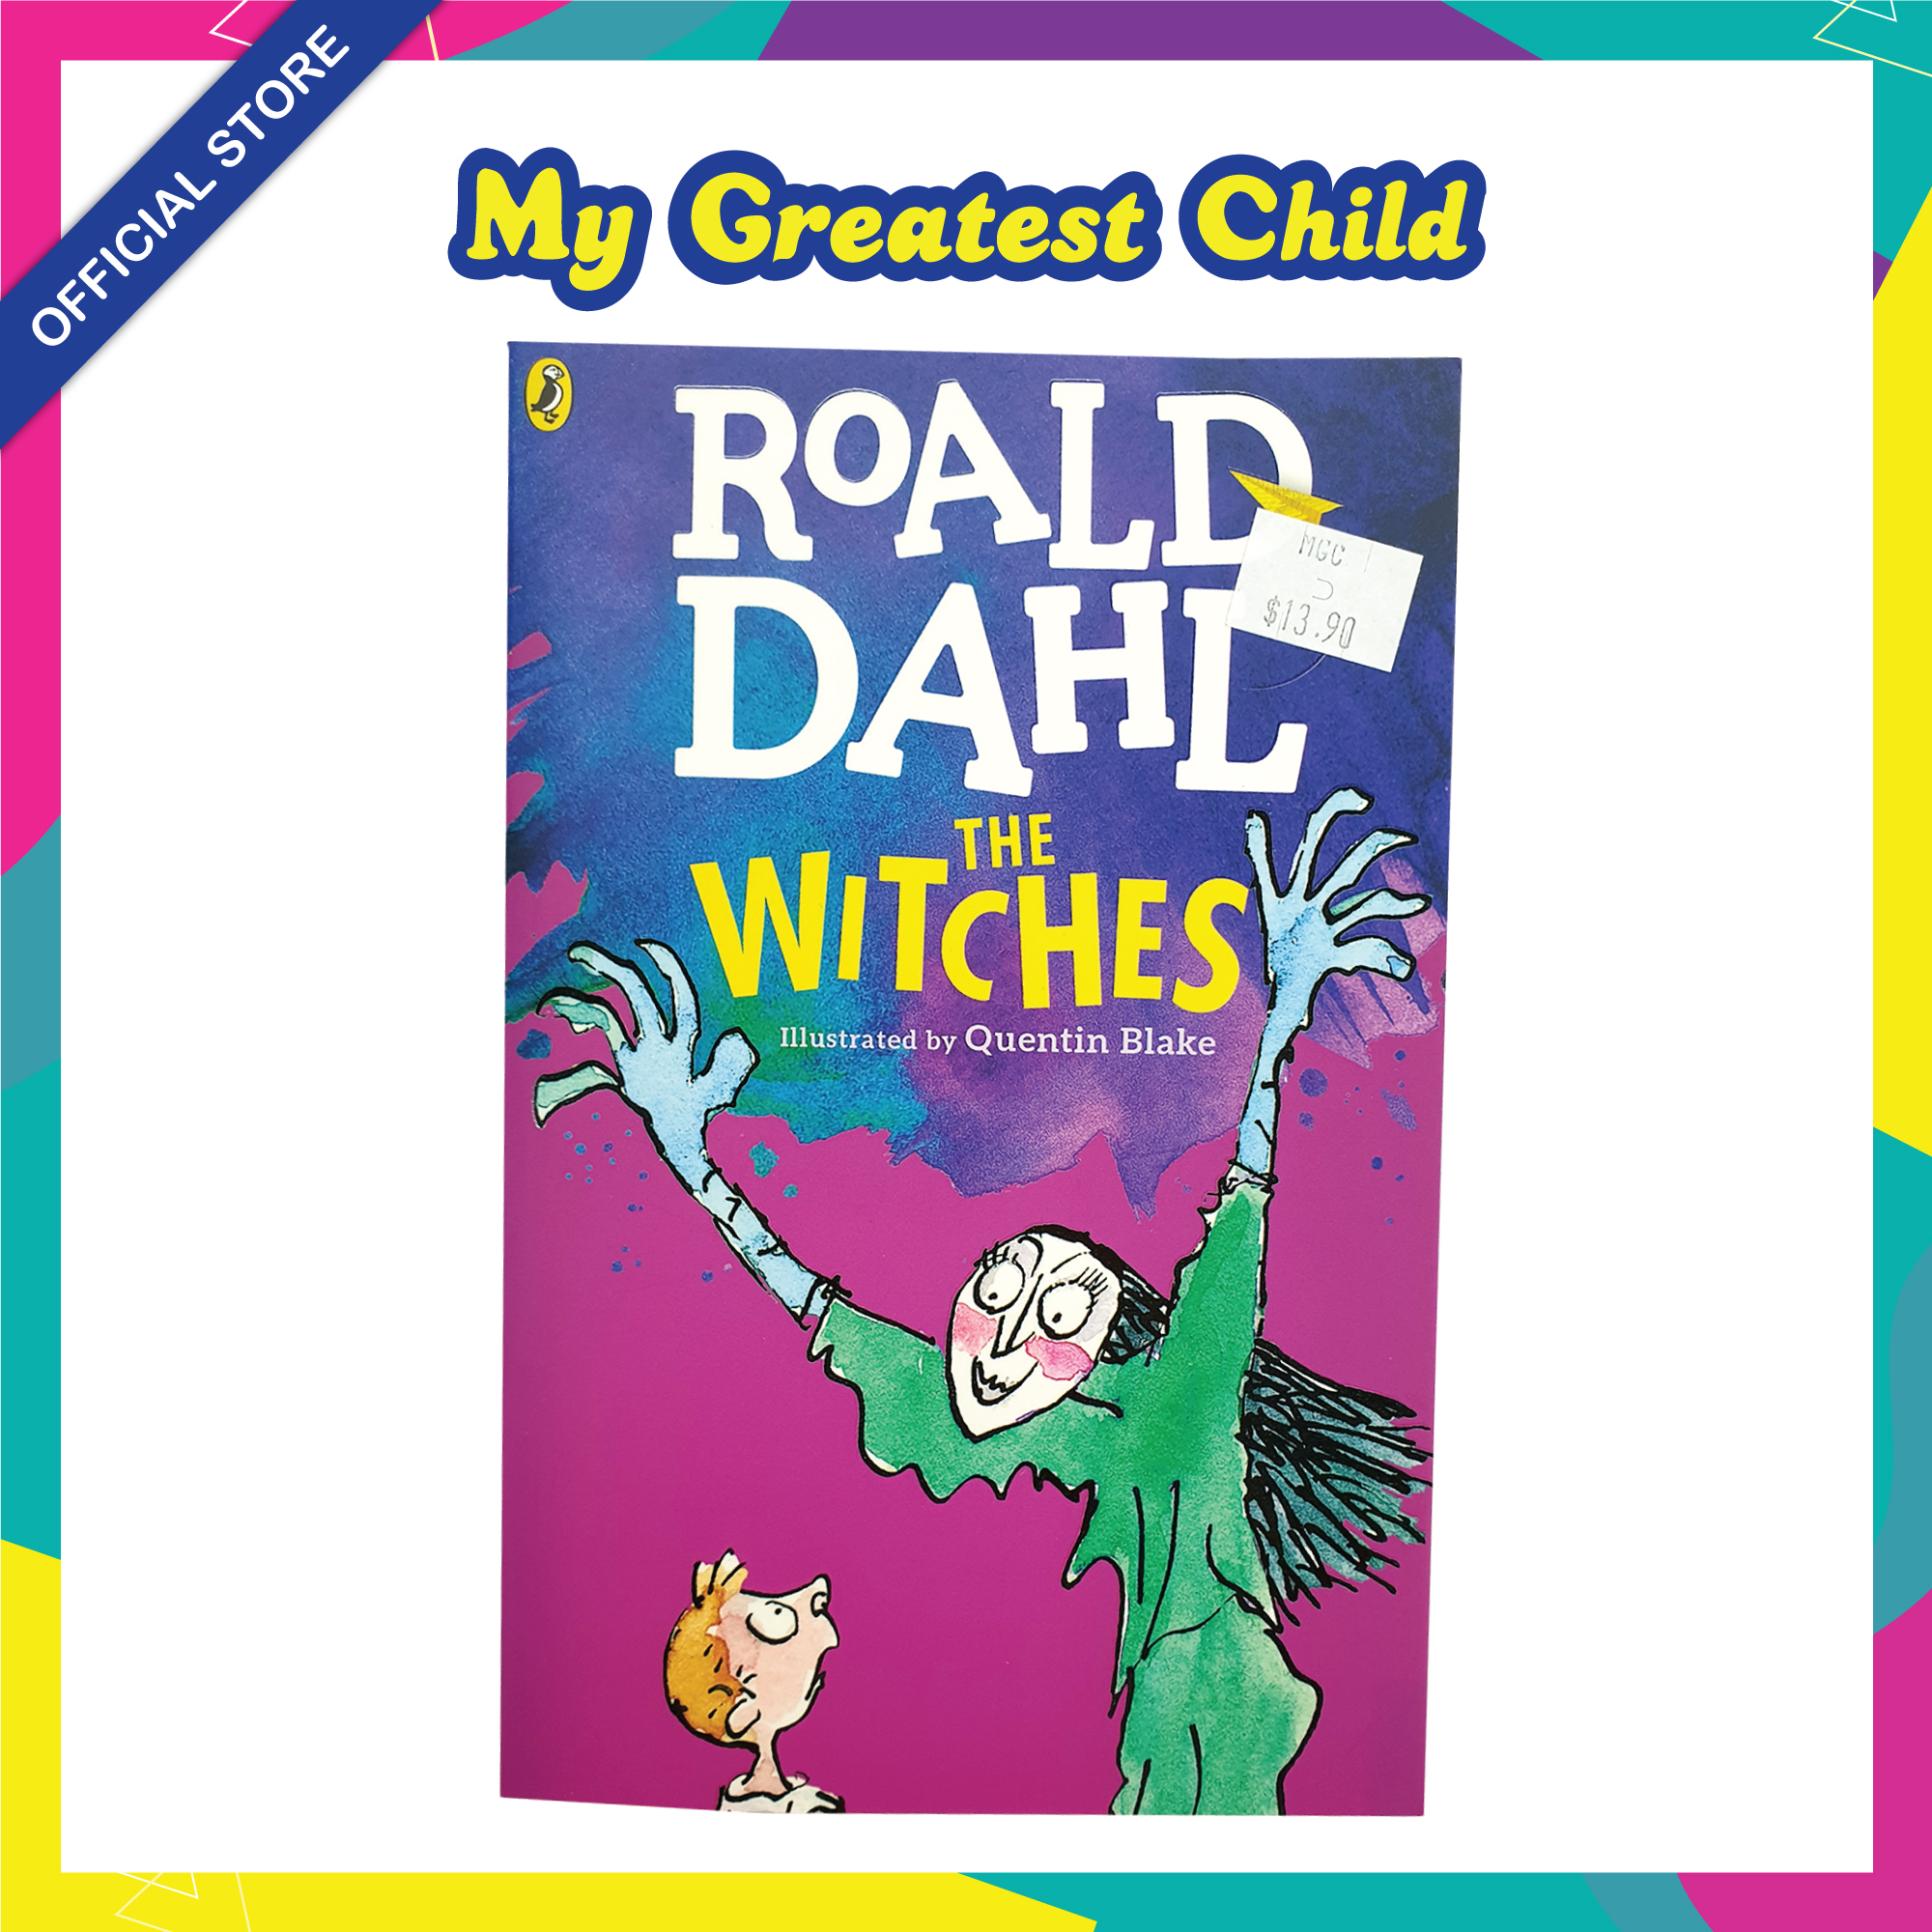 the witches roald dahl book